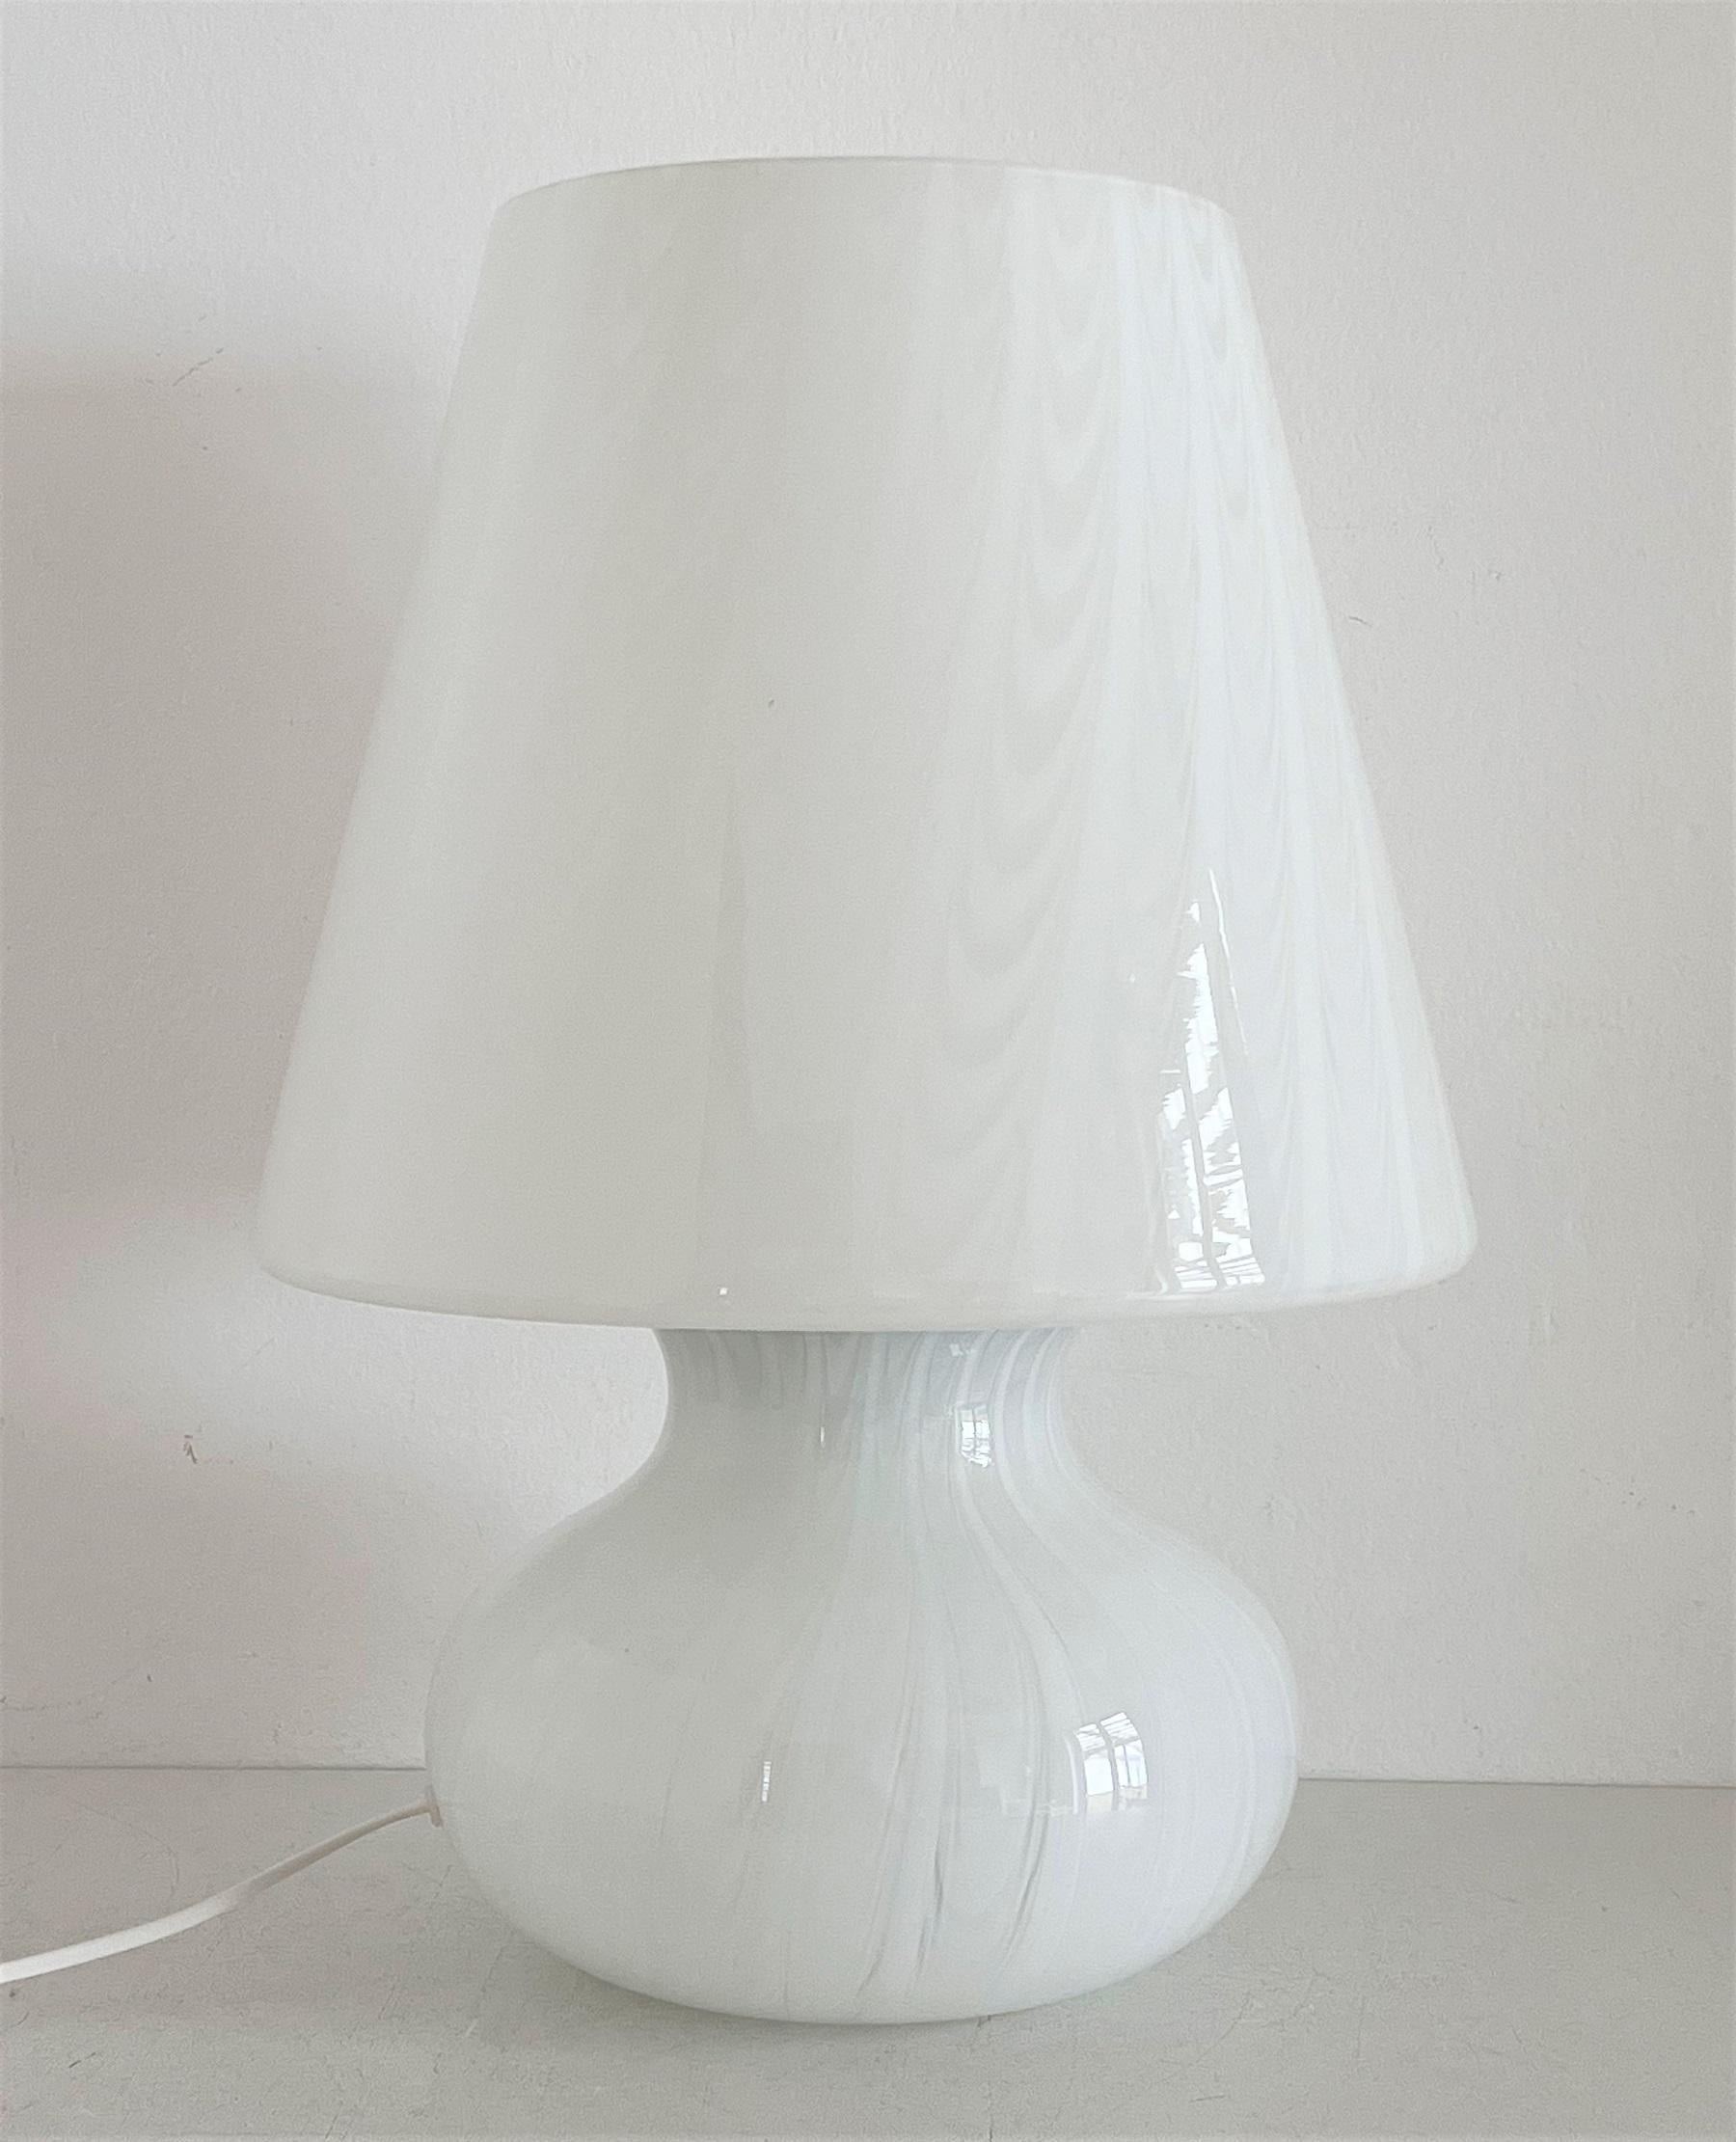 Beautiful and big table lamp in the shape of a mushroom made of gorgeous shiny white Murano glass with white swirl and waves inside the glass.
Made in Italy, Murano, in the 1970s.
The lamp is hand-crafted in Murano; there are two light sources